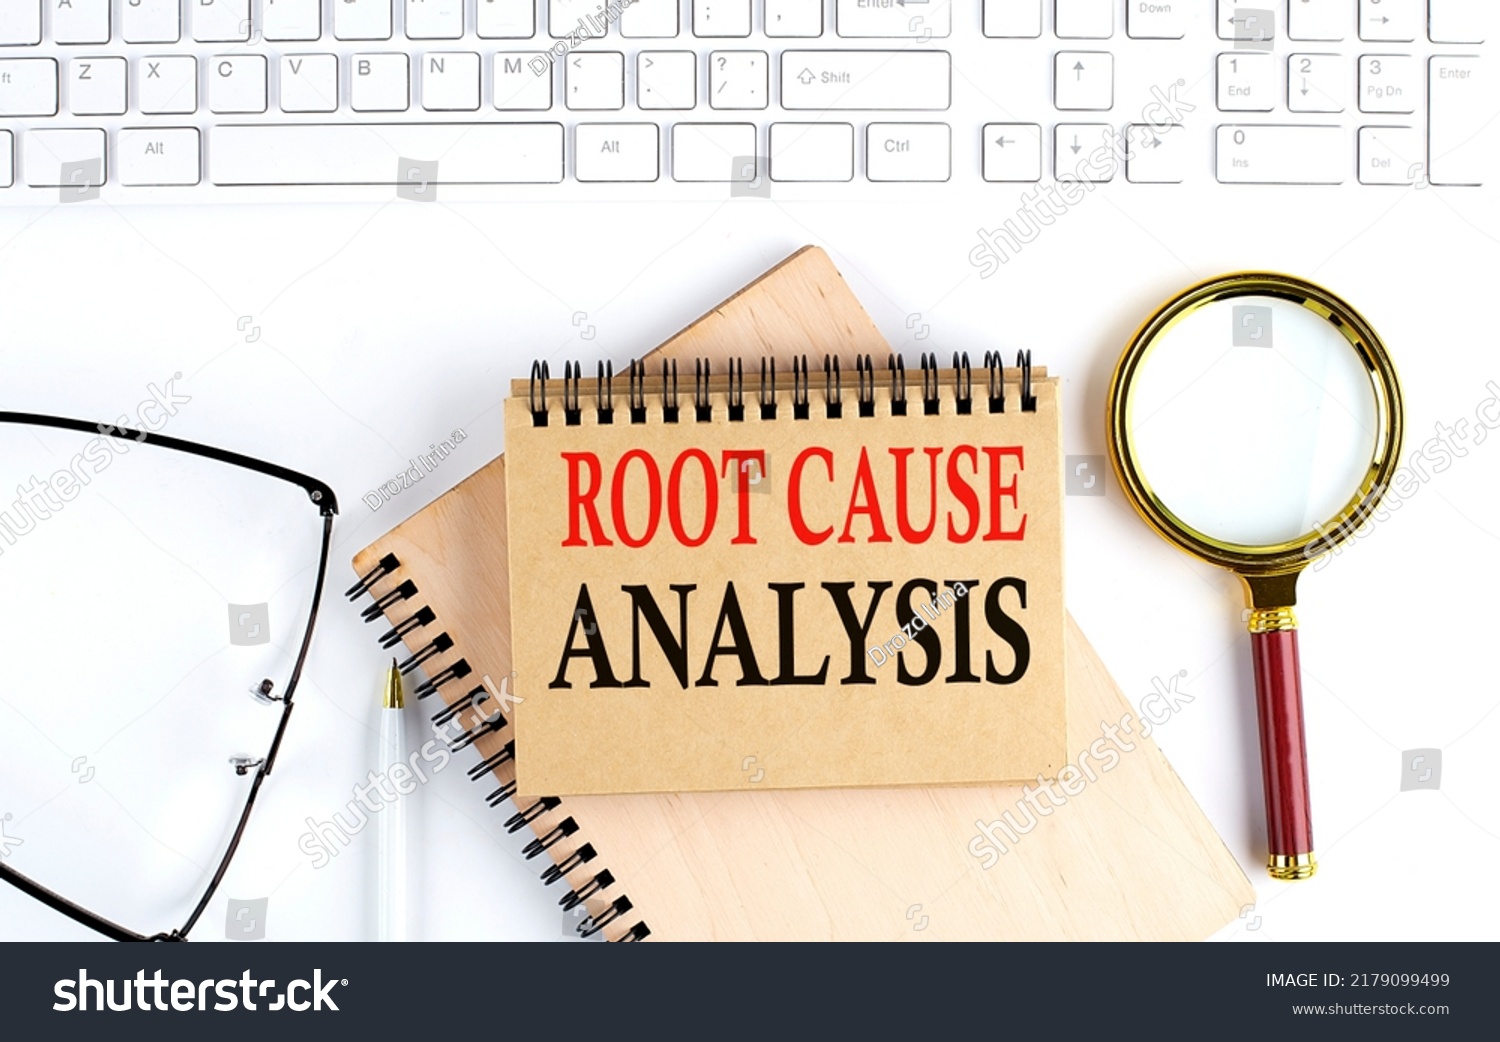 Root Cause Analysis written on paper note pinned with red thumbtack on wooden board. Business conceptual Image #2179099499